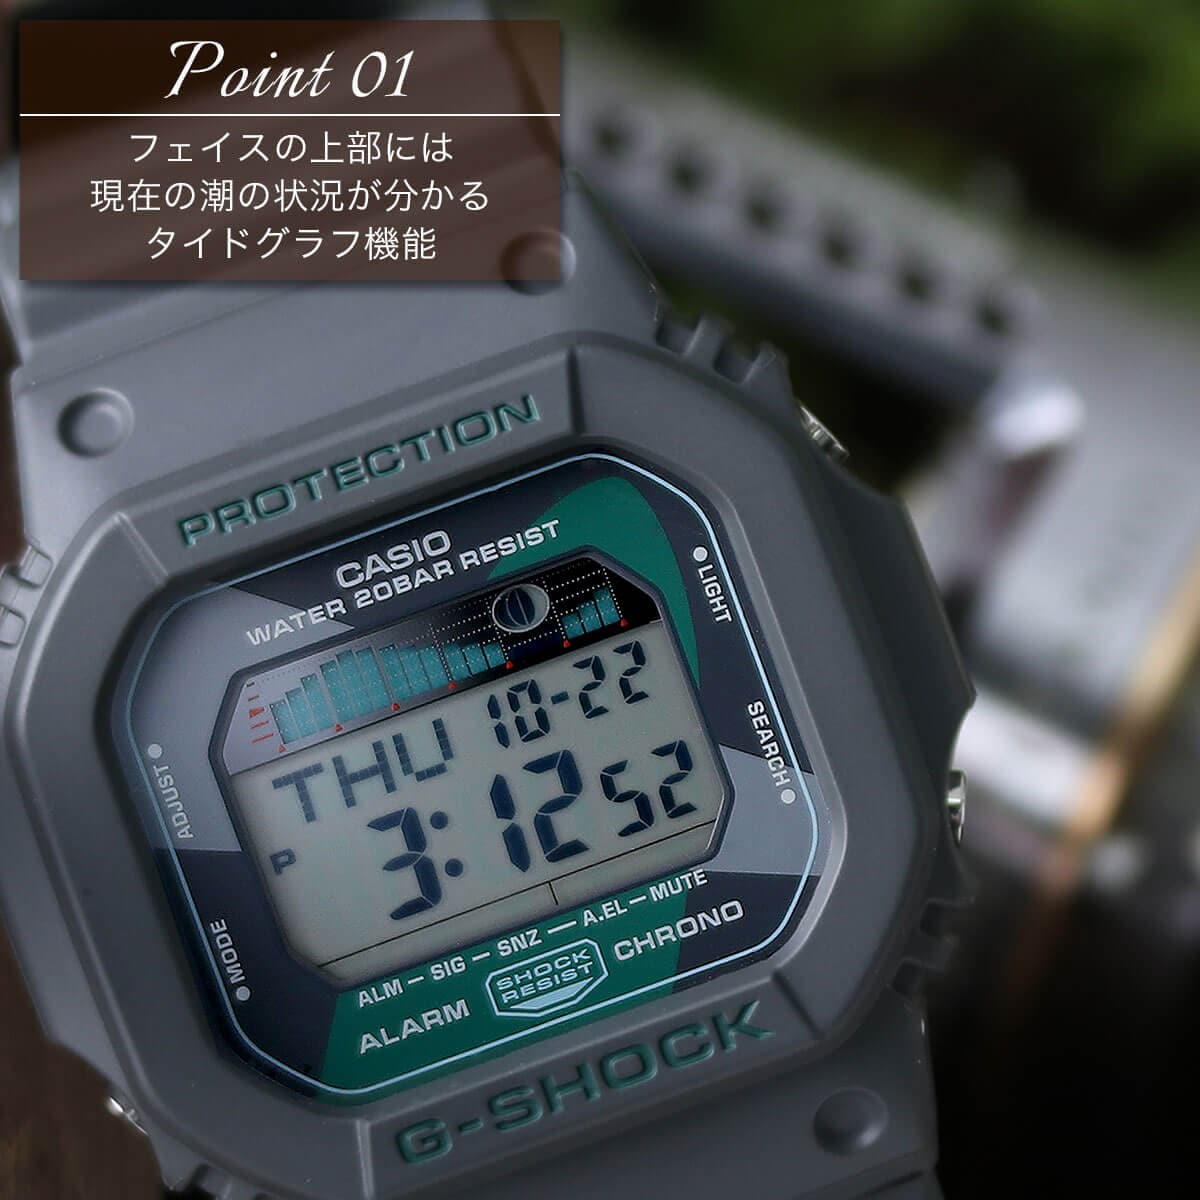 New]The G-SHOCK which is most suitable for fishing Upper lure Bus